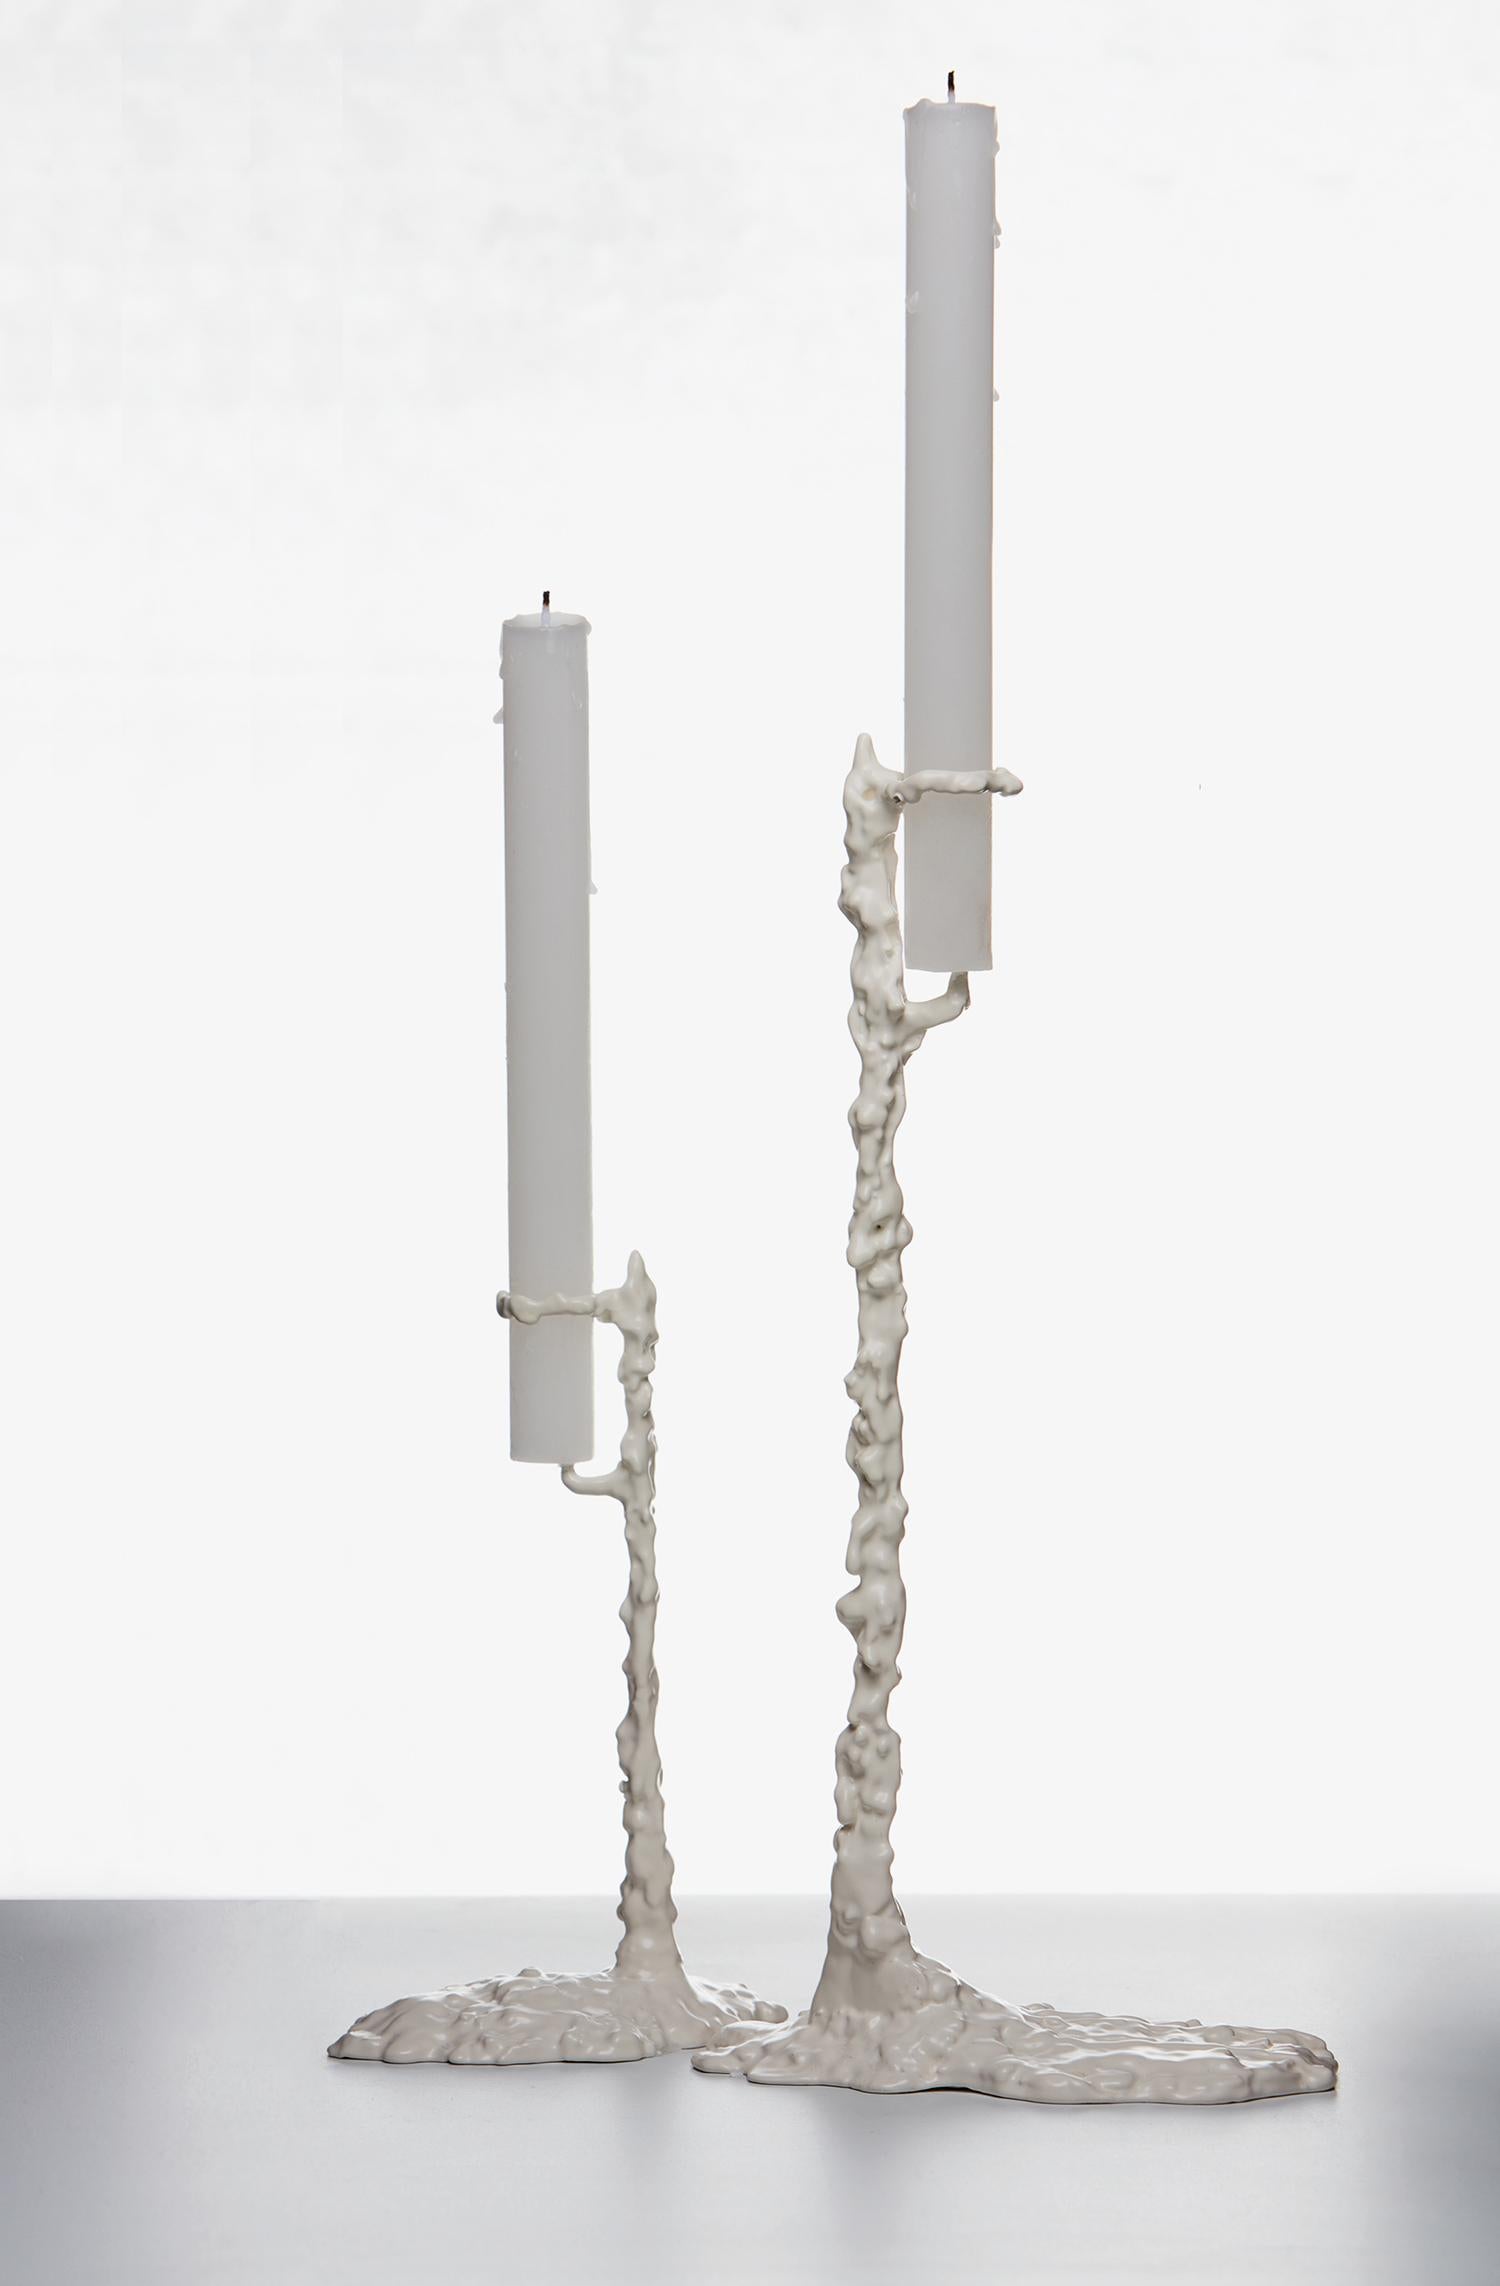 Set of 2 Alberto Candleholders by Oscar Tusquets
Dimensions: High: D 8 x W 12 x H 28 cm.
Low: D 6 x W 10 x H 20 cm.
Materials: Cast iron painted in matte white.

Available in two different sizes: low (D 6 x W 10 x H 20 cm) and high (D 8 x W 12